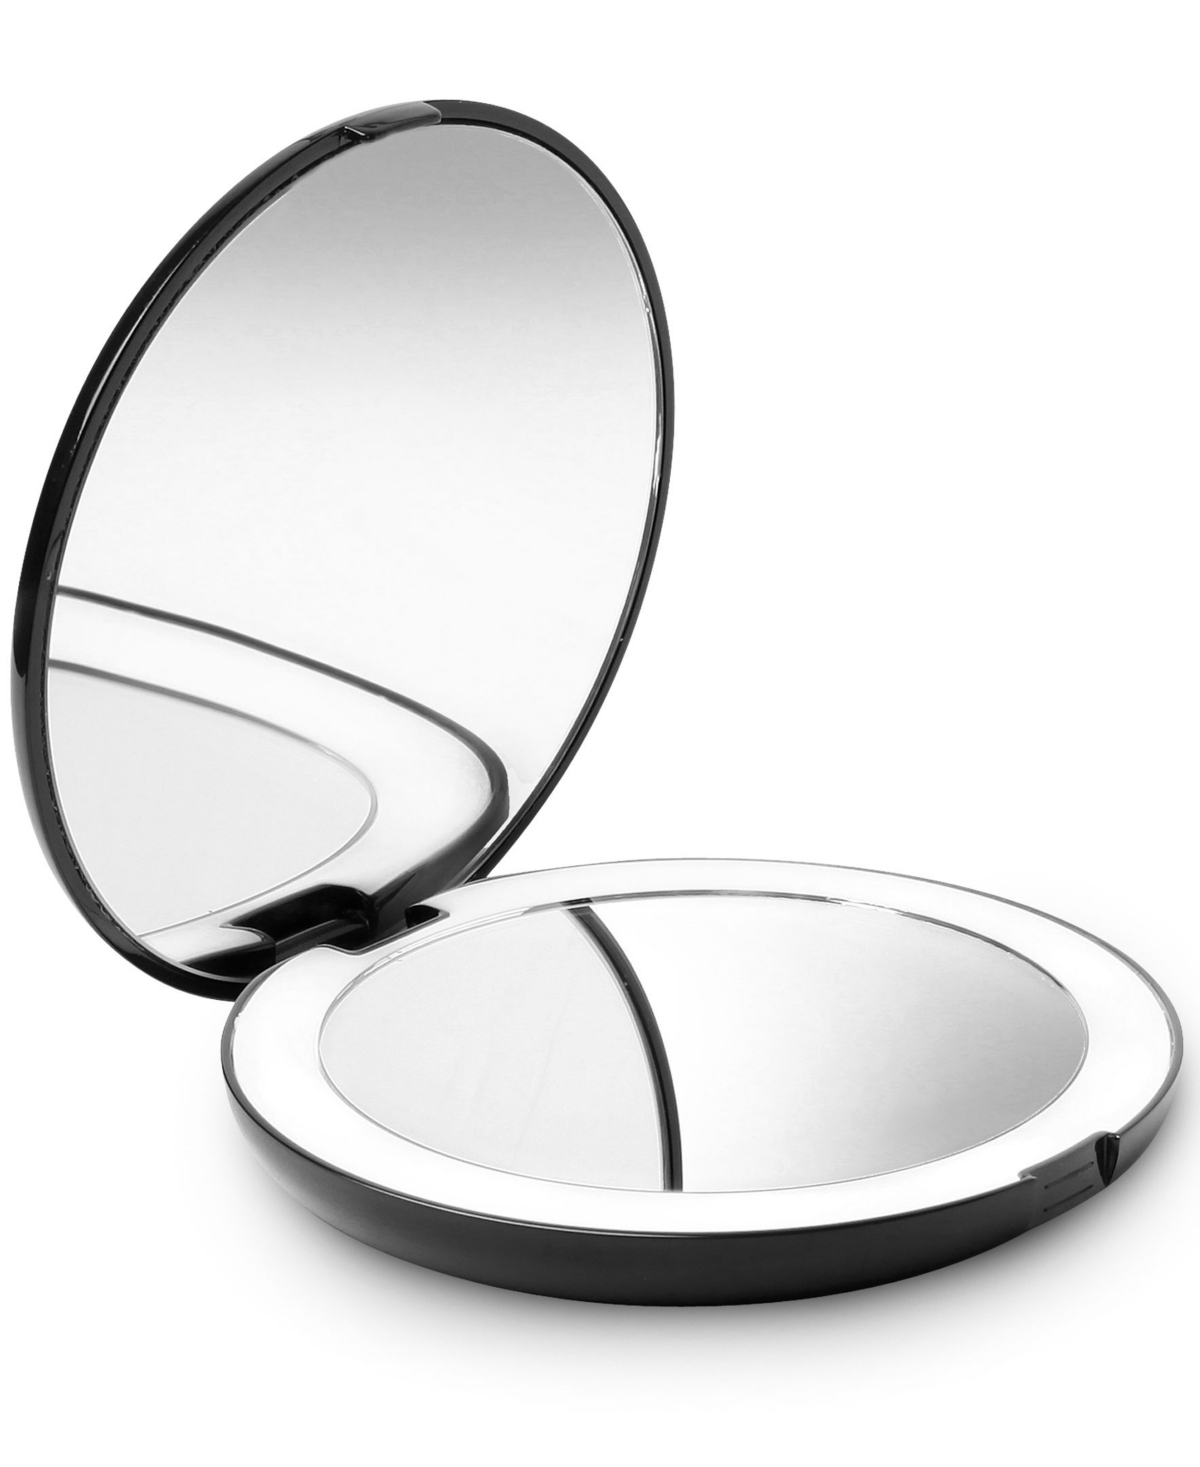 Fancii Lumi 5" Compact Mirror with Led Lights